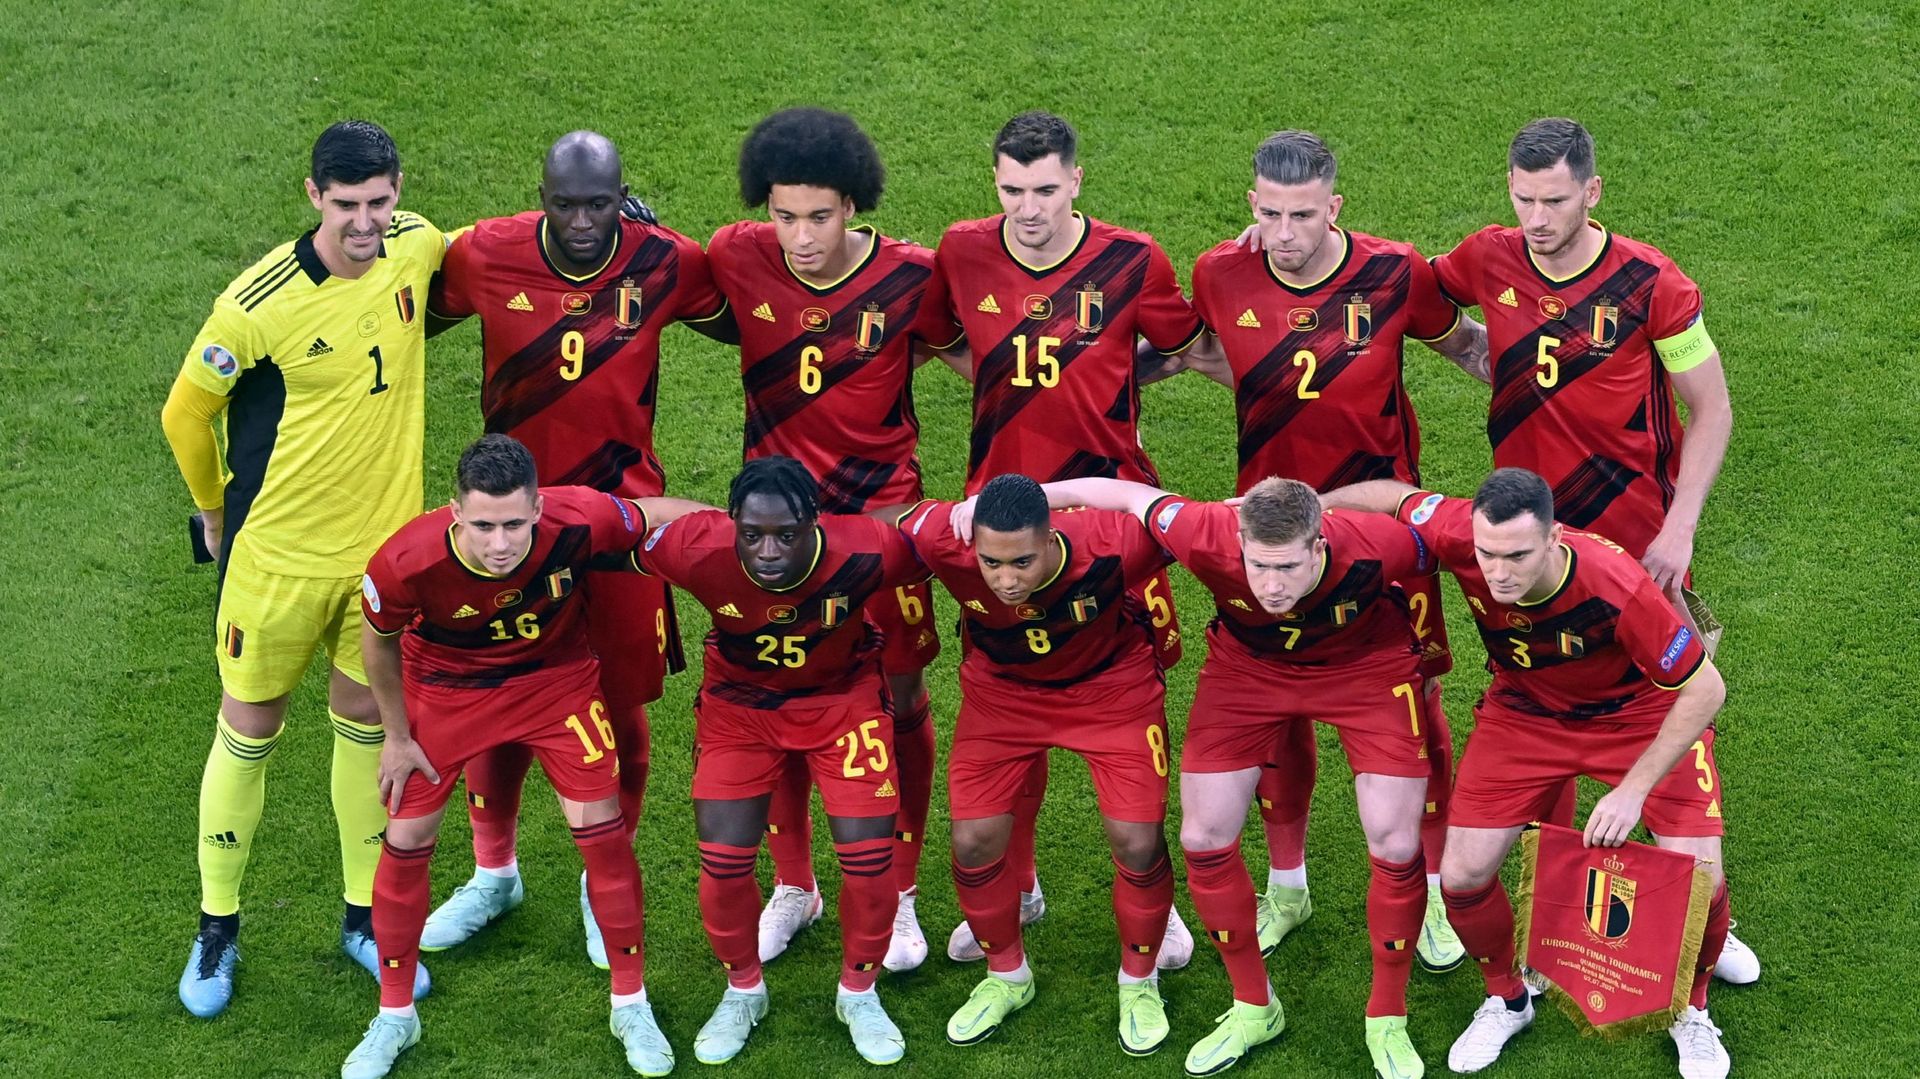 Belgian players pose for a family portrait ahead of the quarter-finals game of the Euro 2020 European Championship between the Belgian national soccer team Red Devils and Italy